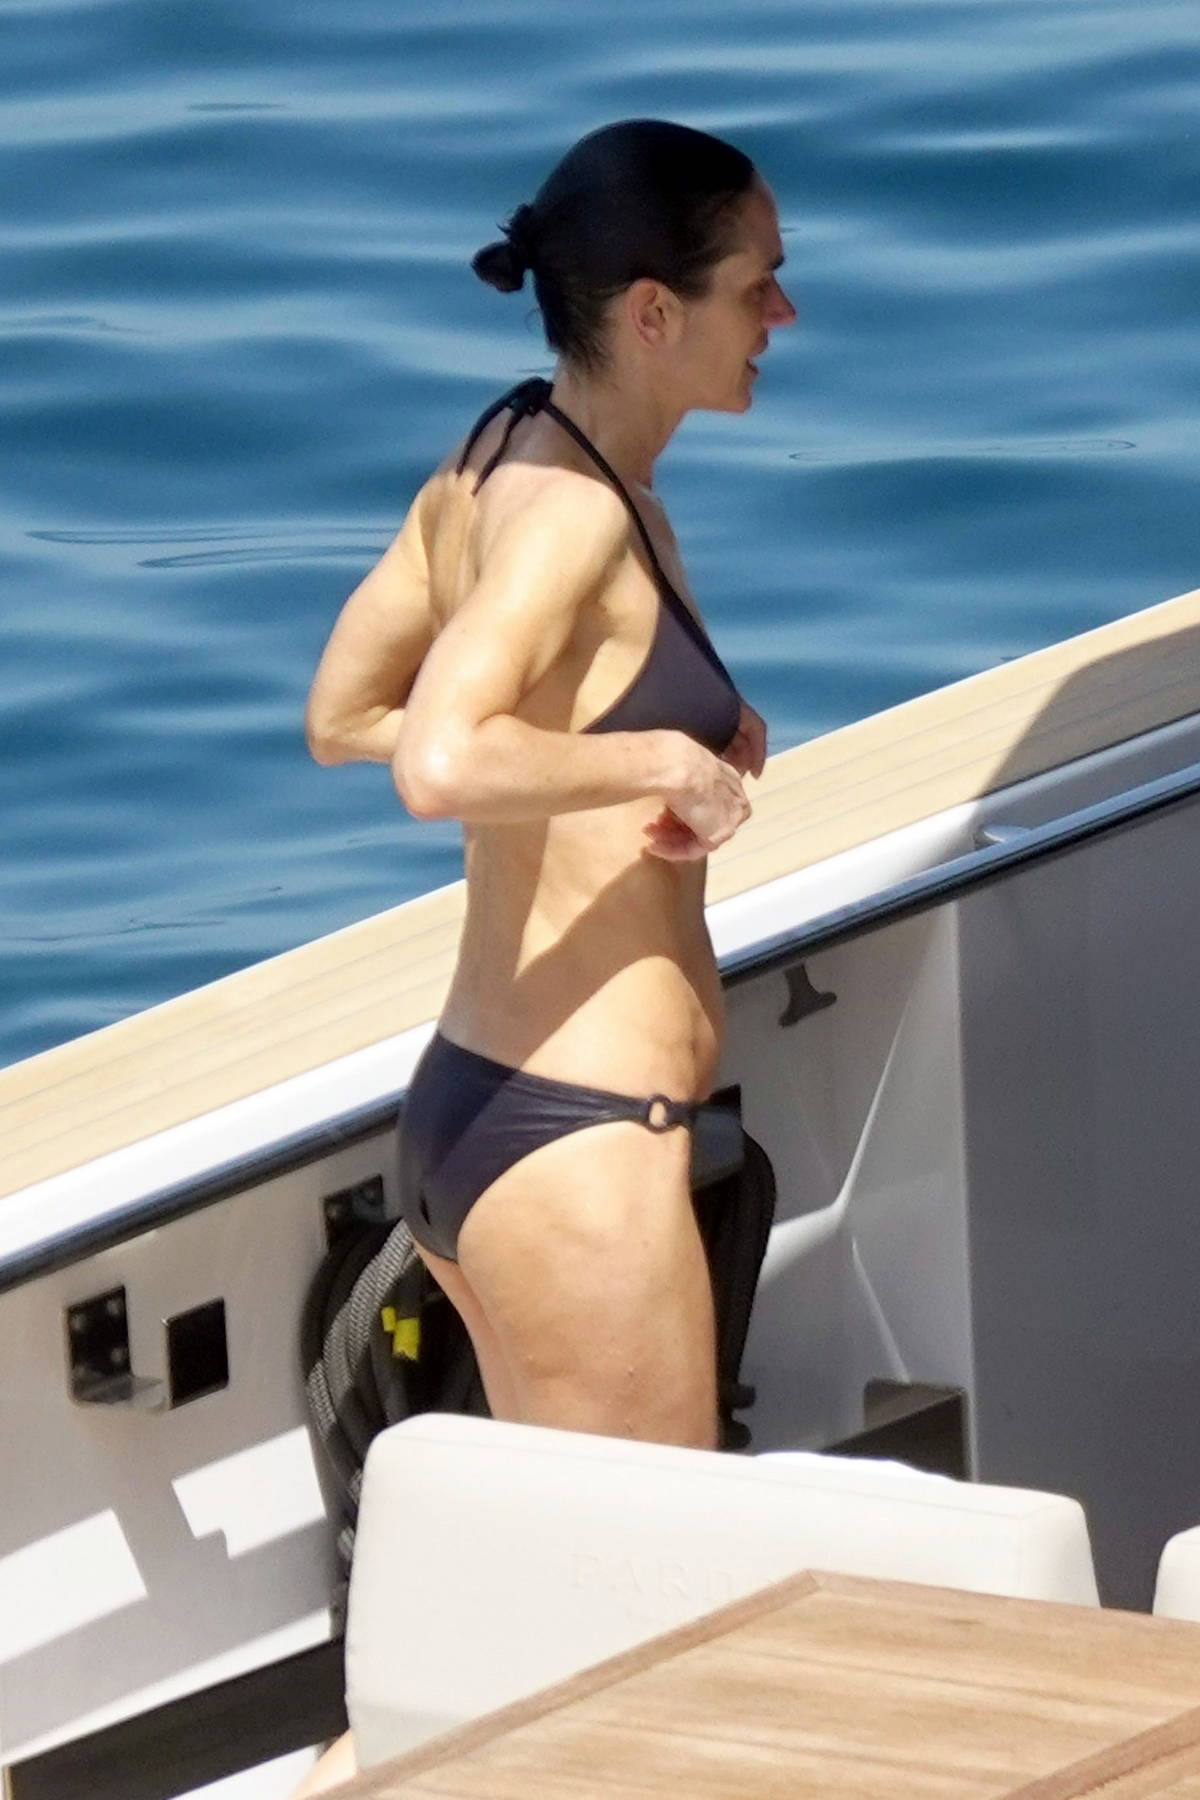 Jennifer Connelly stuns in a black bikini while relaxing on a